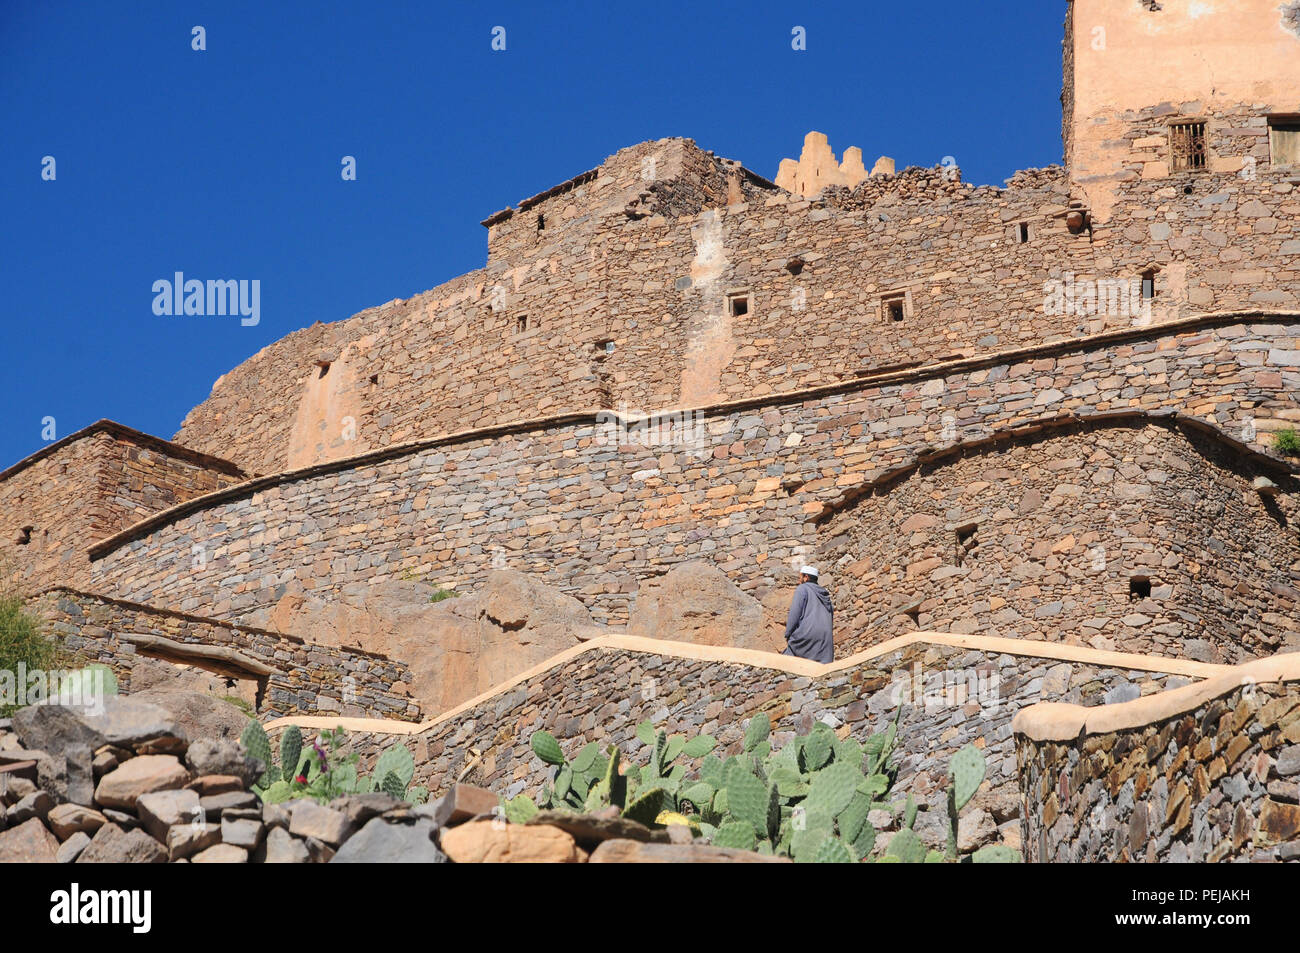 Fortified walls of Kasbah Tizourgane in the anti Atlas mountains of Morocco Stock Photo